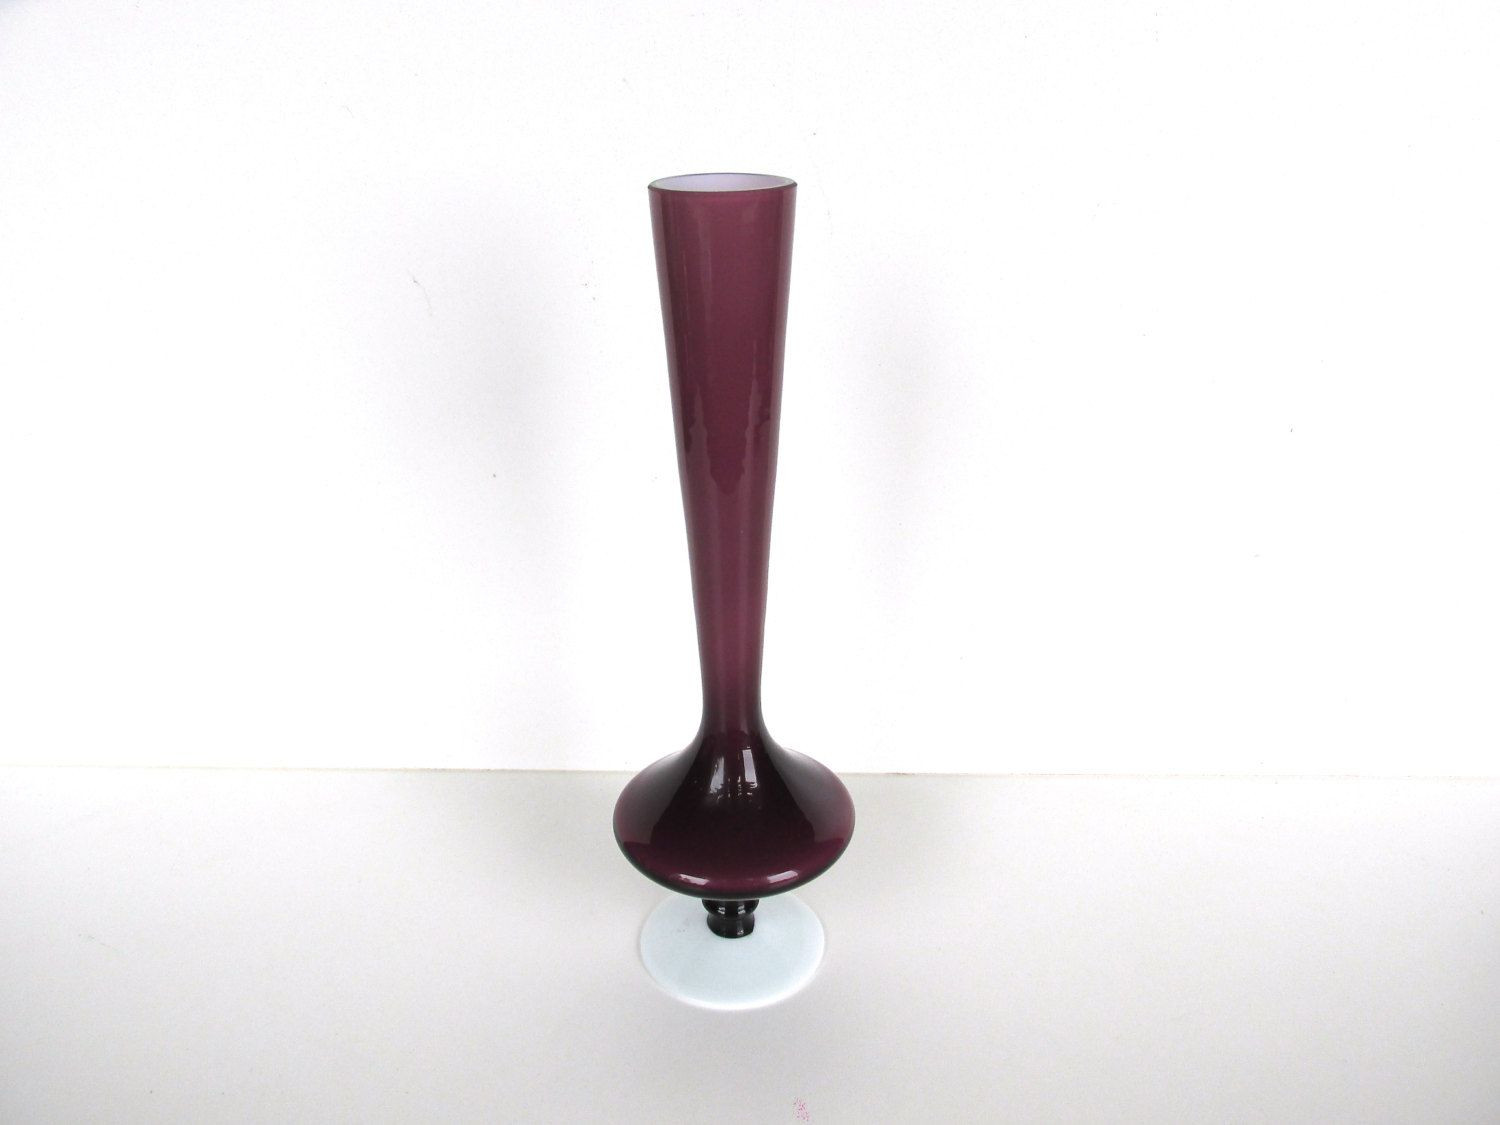 15 Stunning Fluted Glass Vase 2024 free download fluted glass vase of vintage scandinavian glass vase ifp sweden smokey glass bud intended for 4eab3efba5e882b2cc347a2c62baf6d5